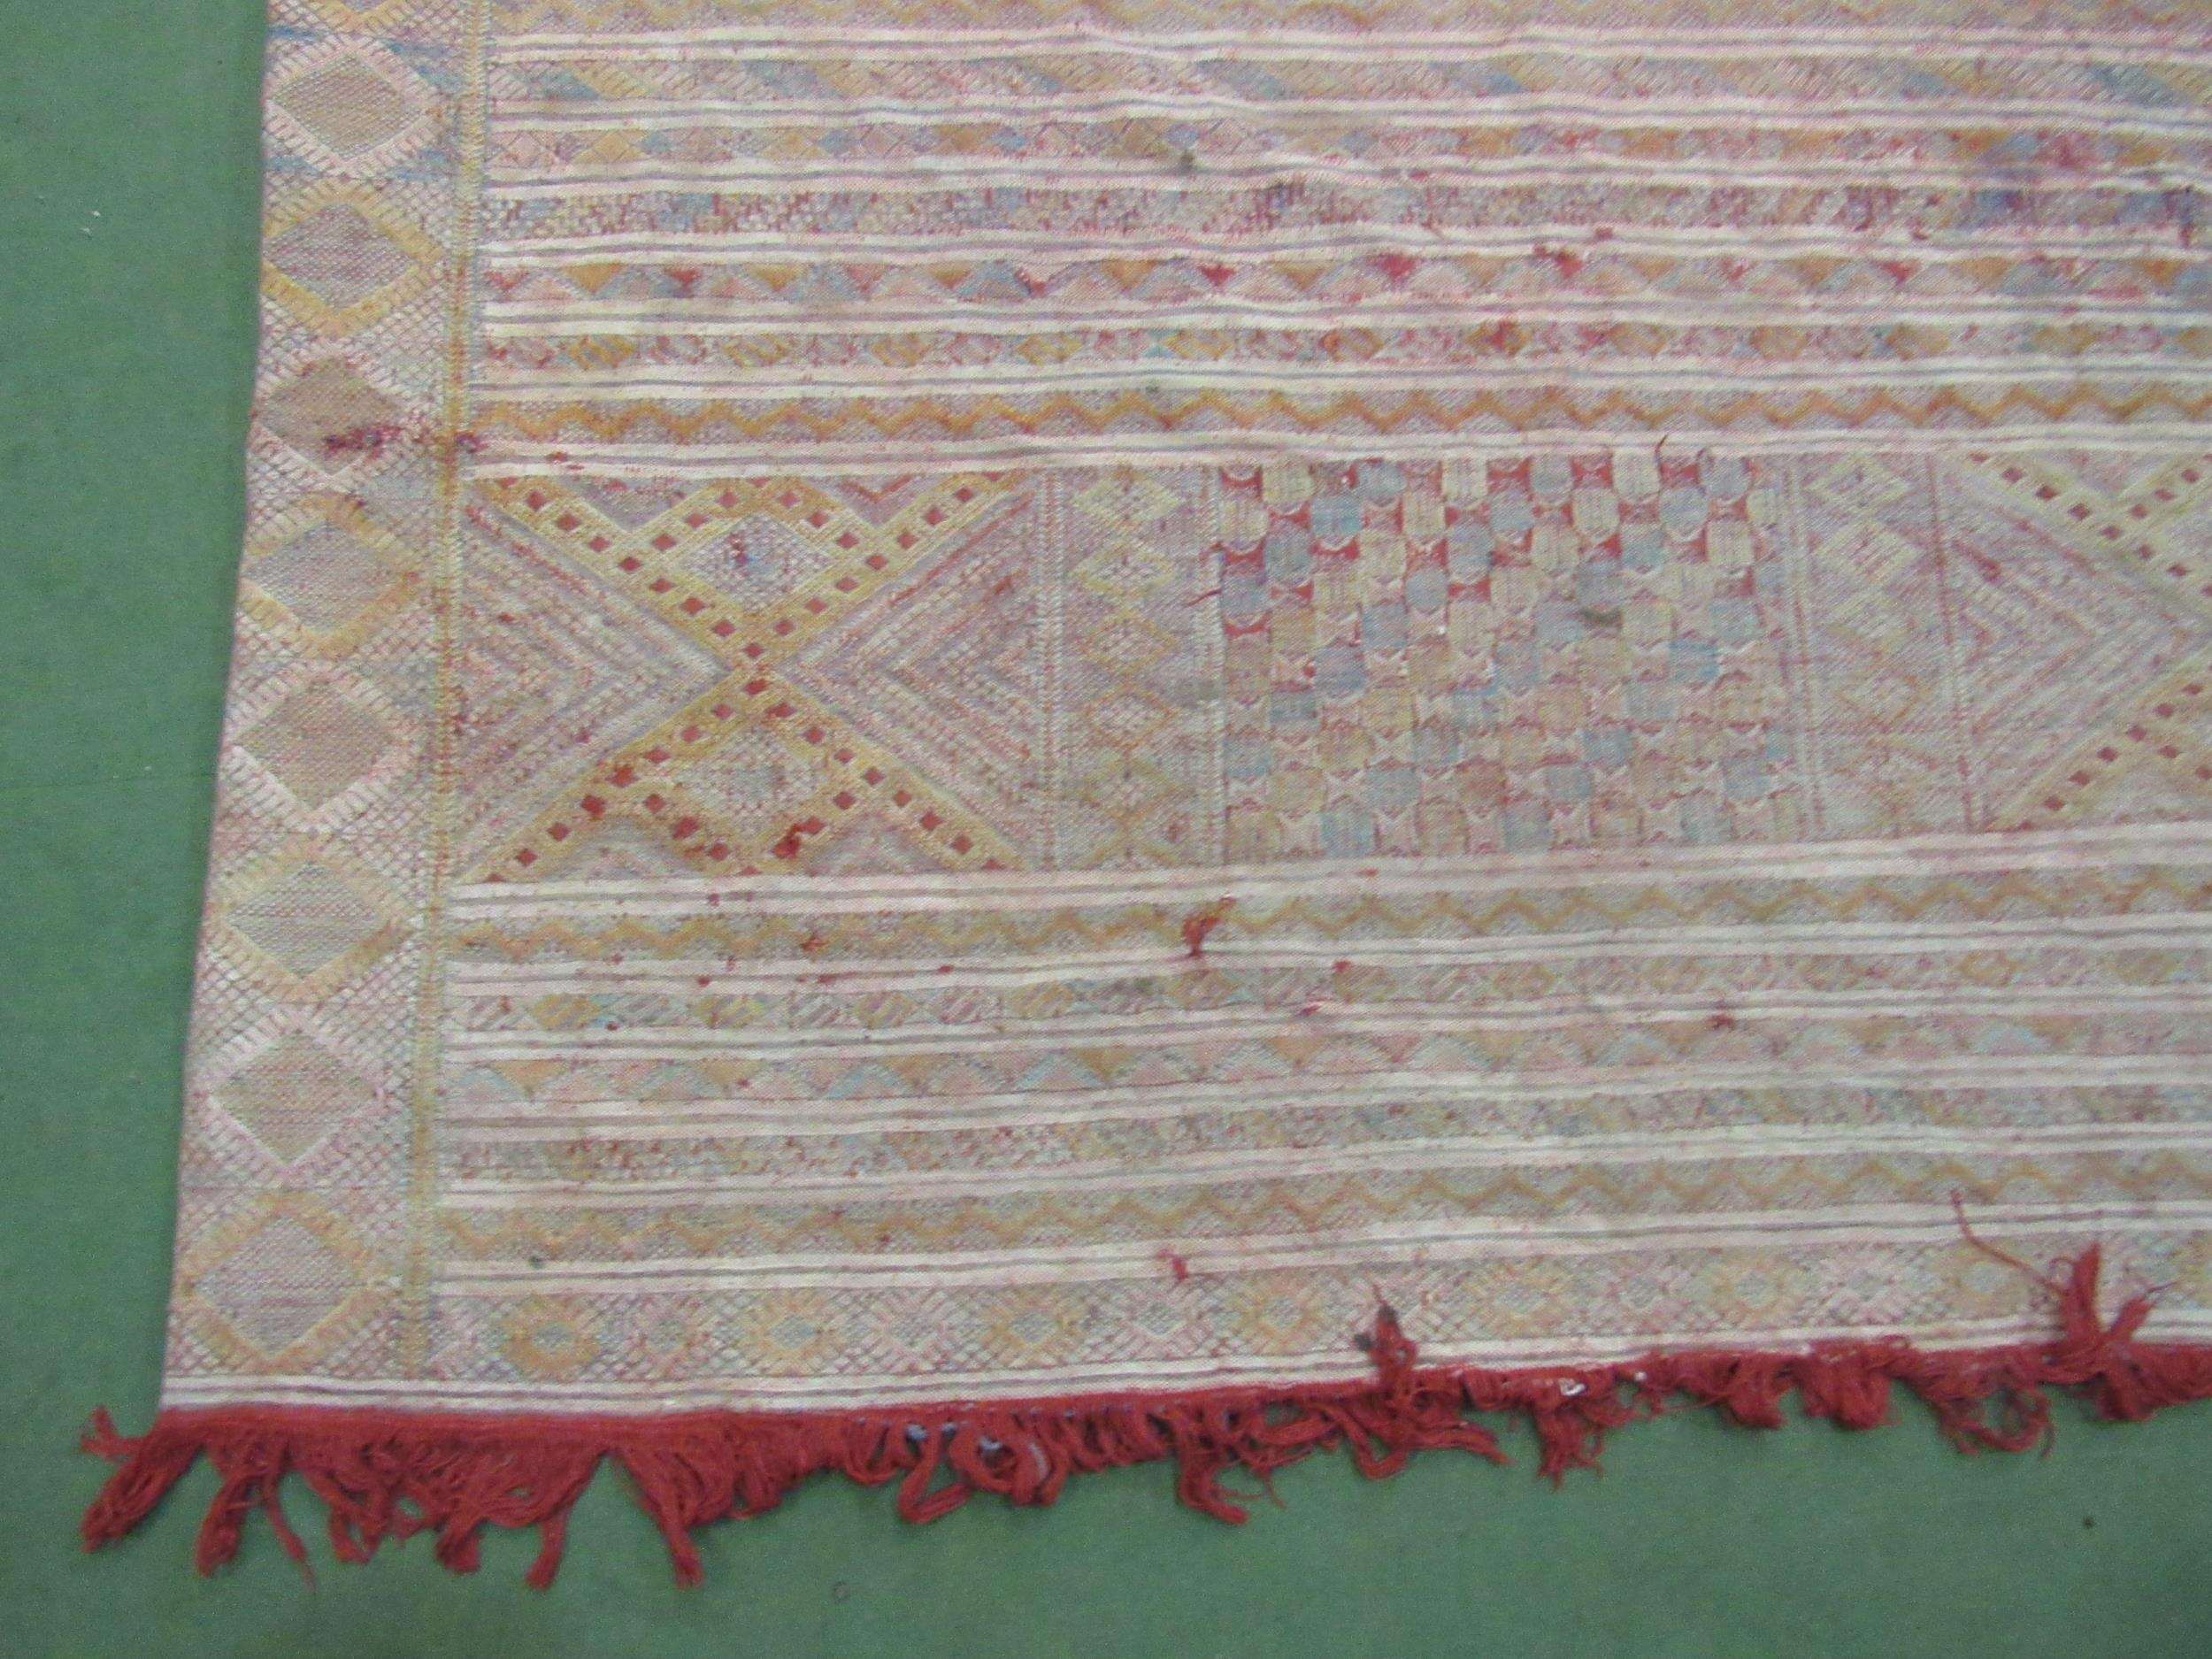 An Eastern hand woven geometric design rug, badly stained, a/f, 316cm x 178cm - Image 4 of 6